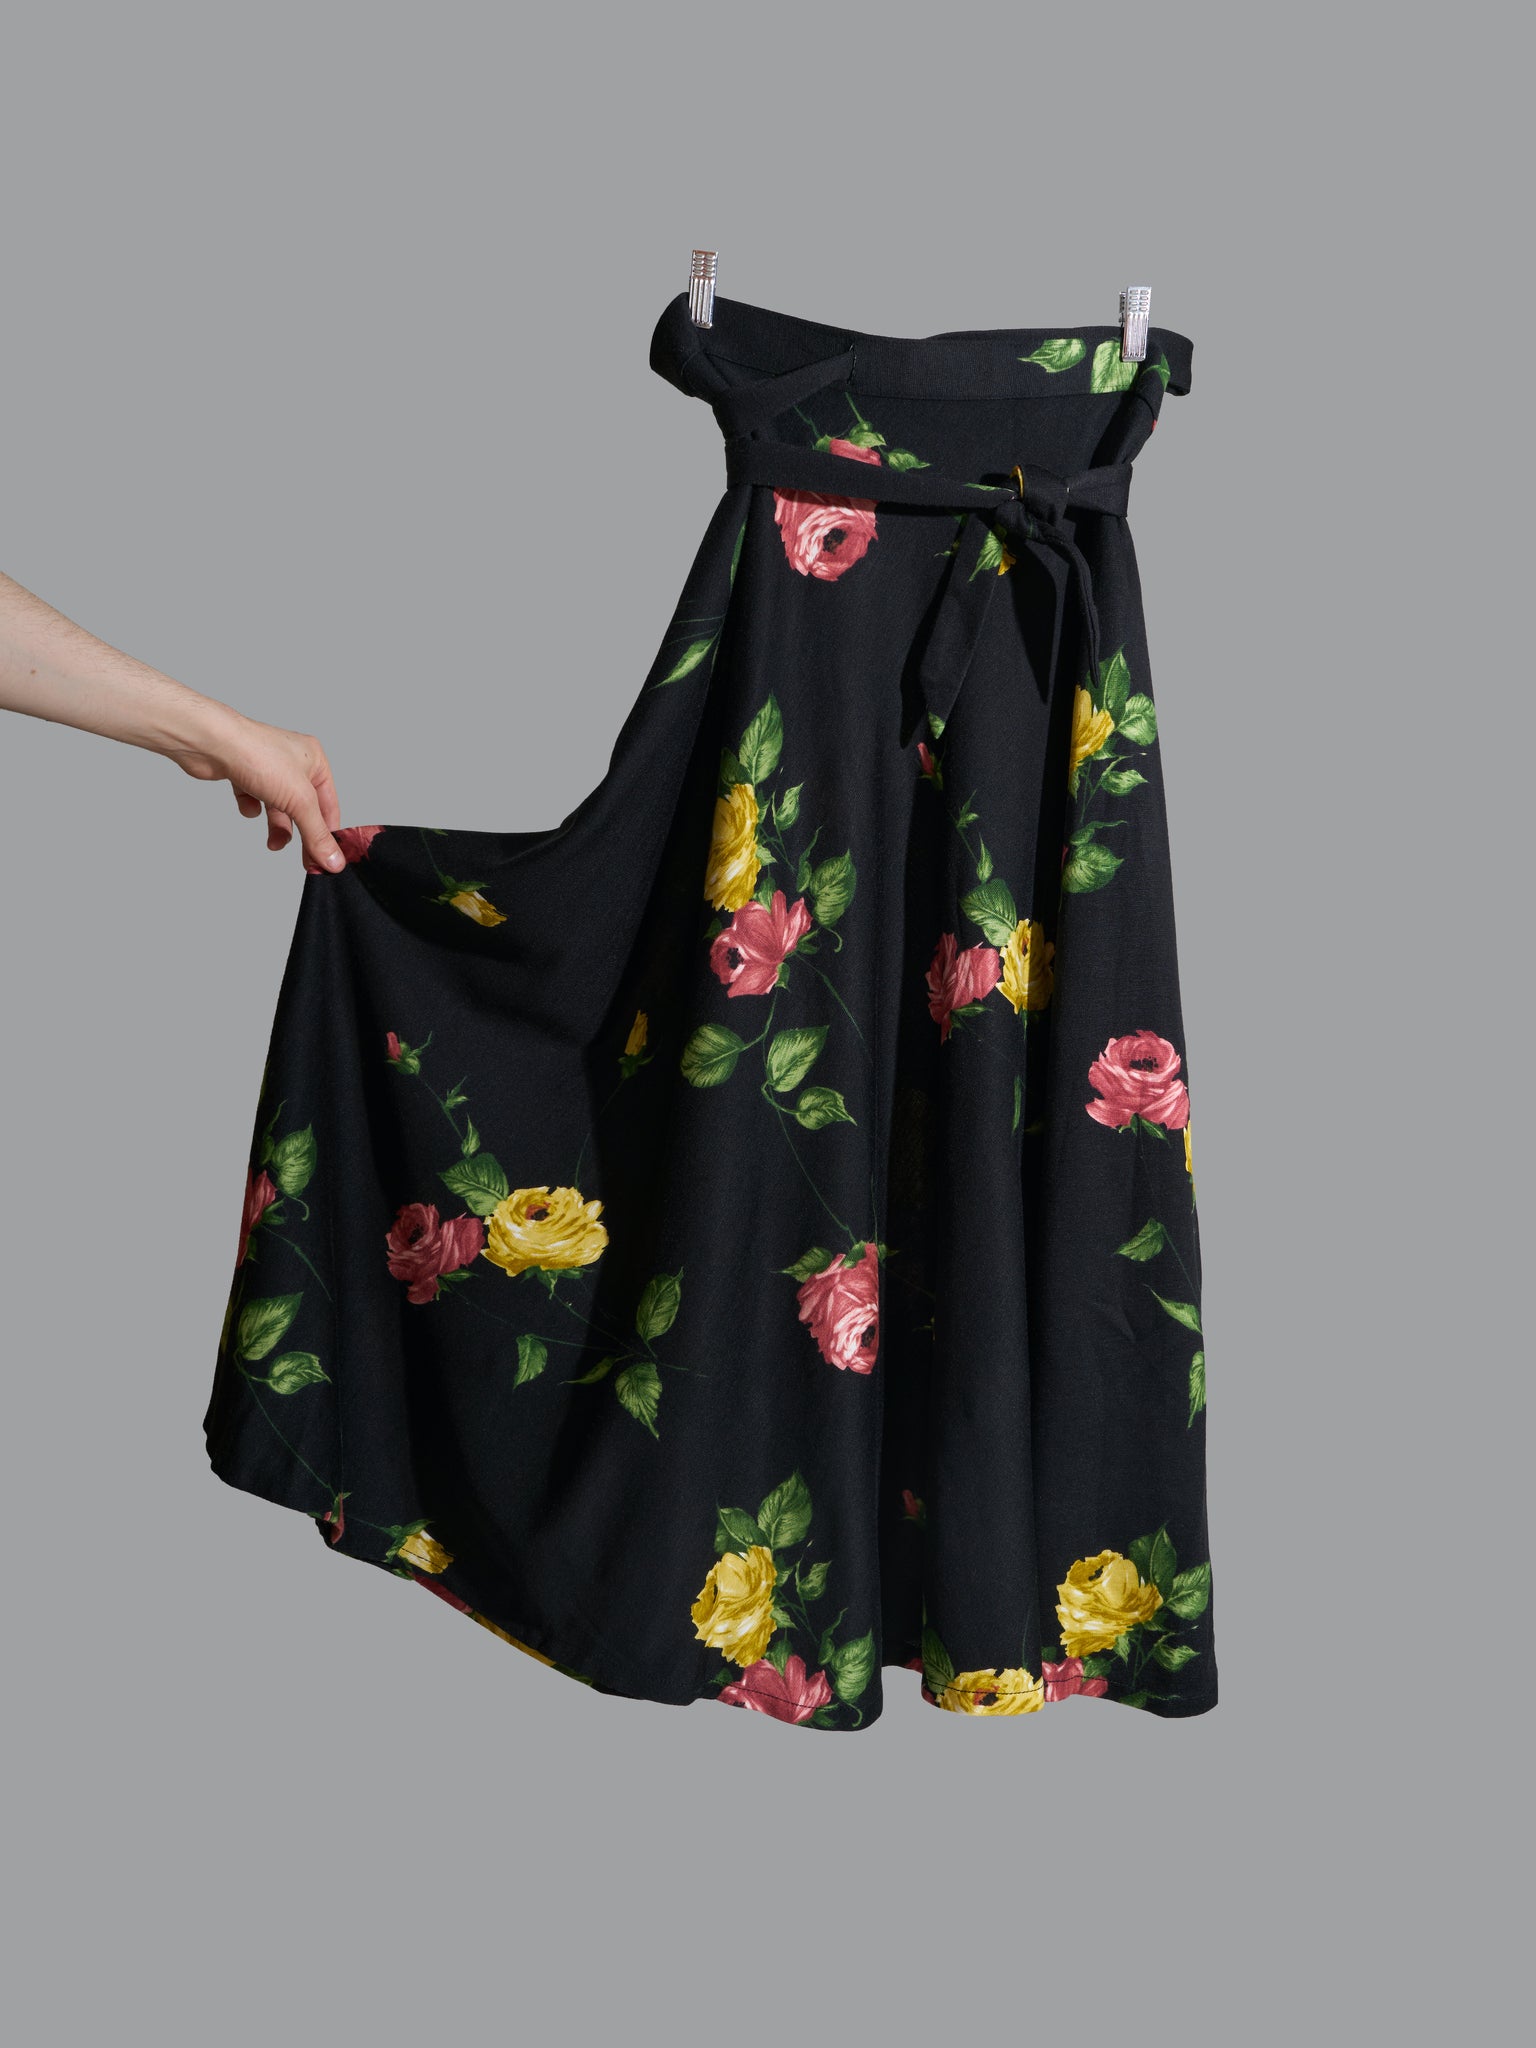 vintage 1970s black polyester wrap skirt with red and yellow floral rose print